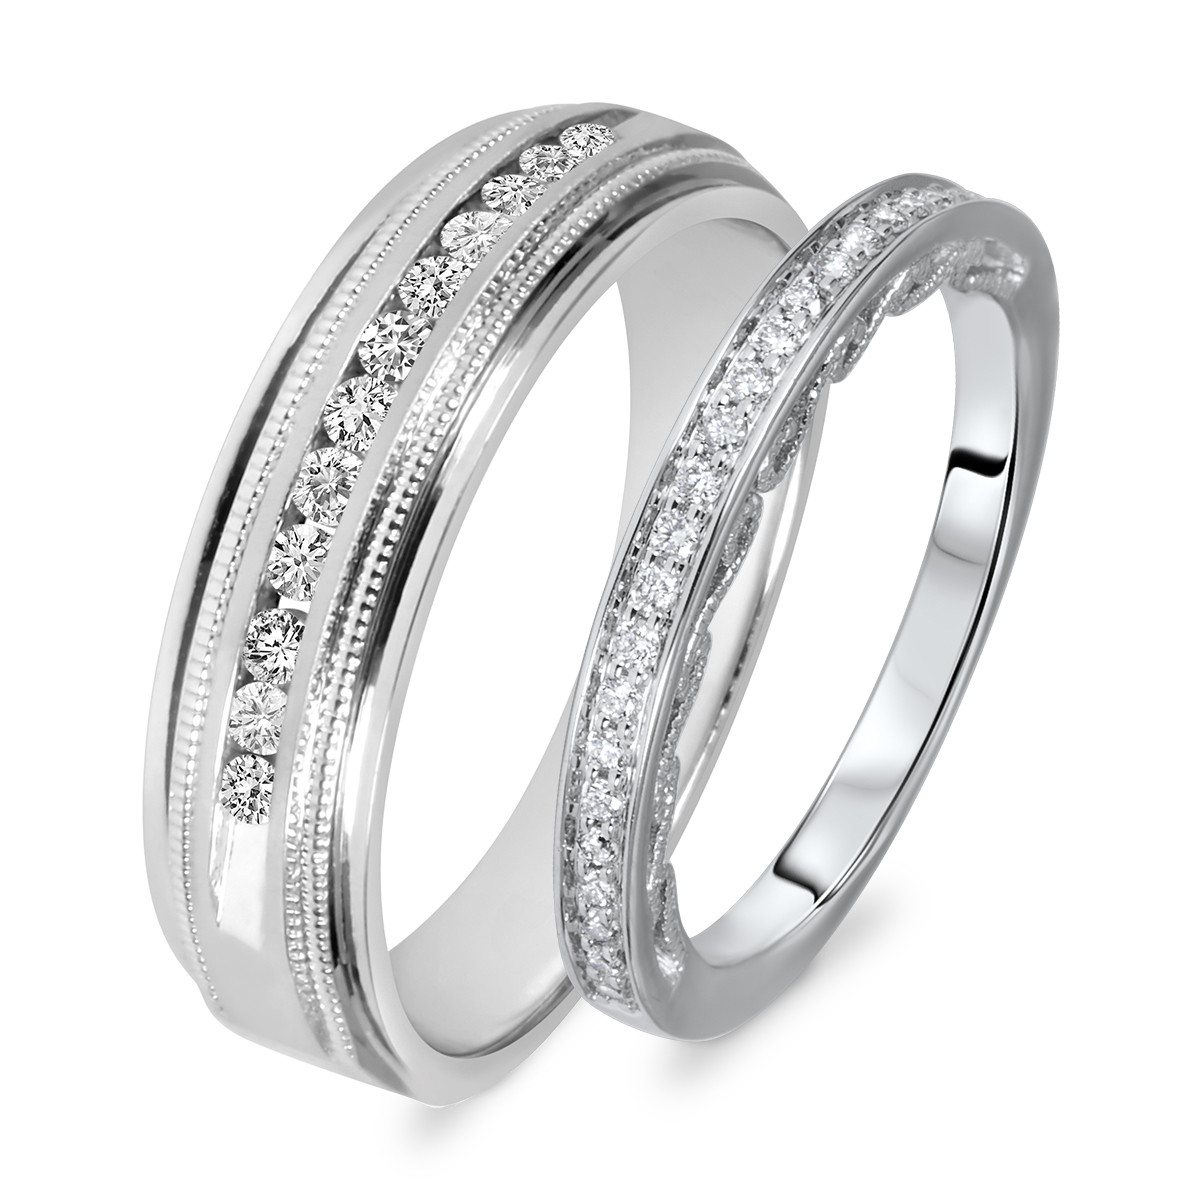 Wedding Band Sets His And Hers
 3 8 Carat T W Round Cut Diamond His And Hers Wedding Band